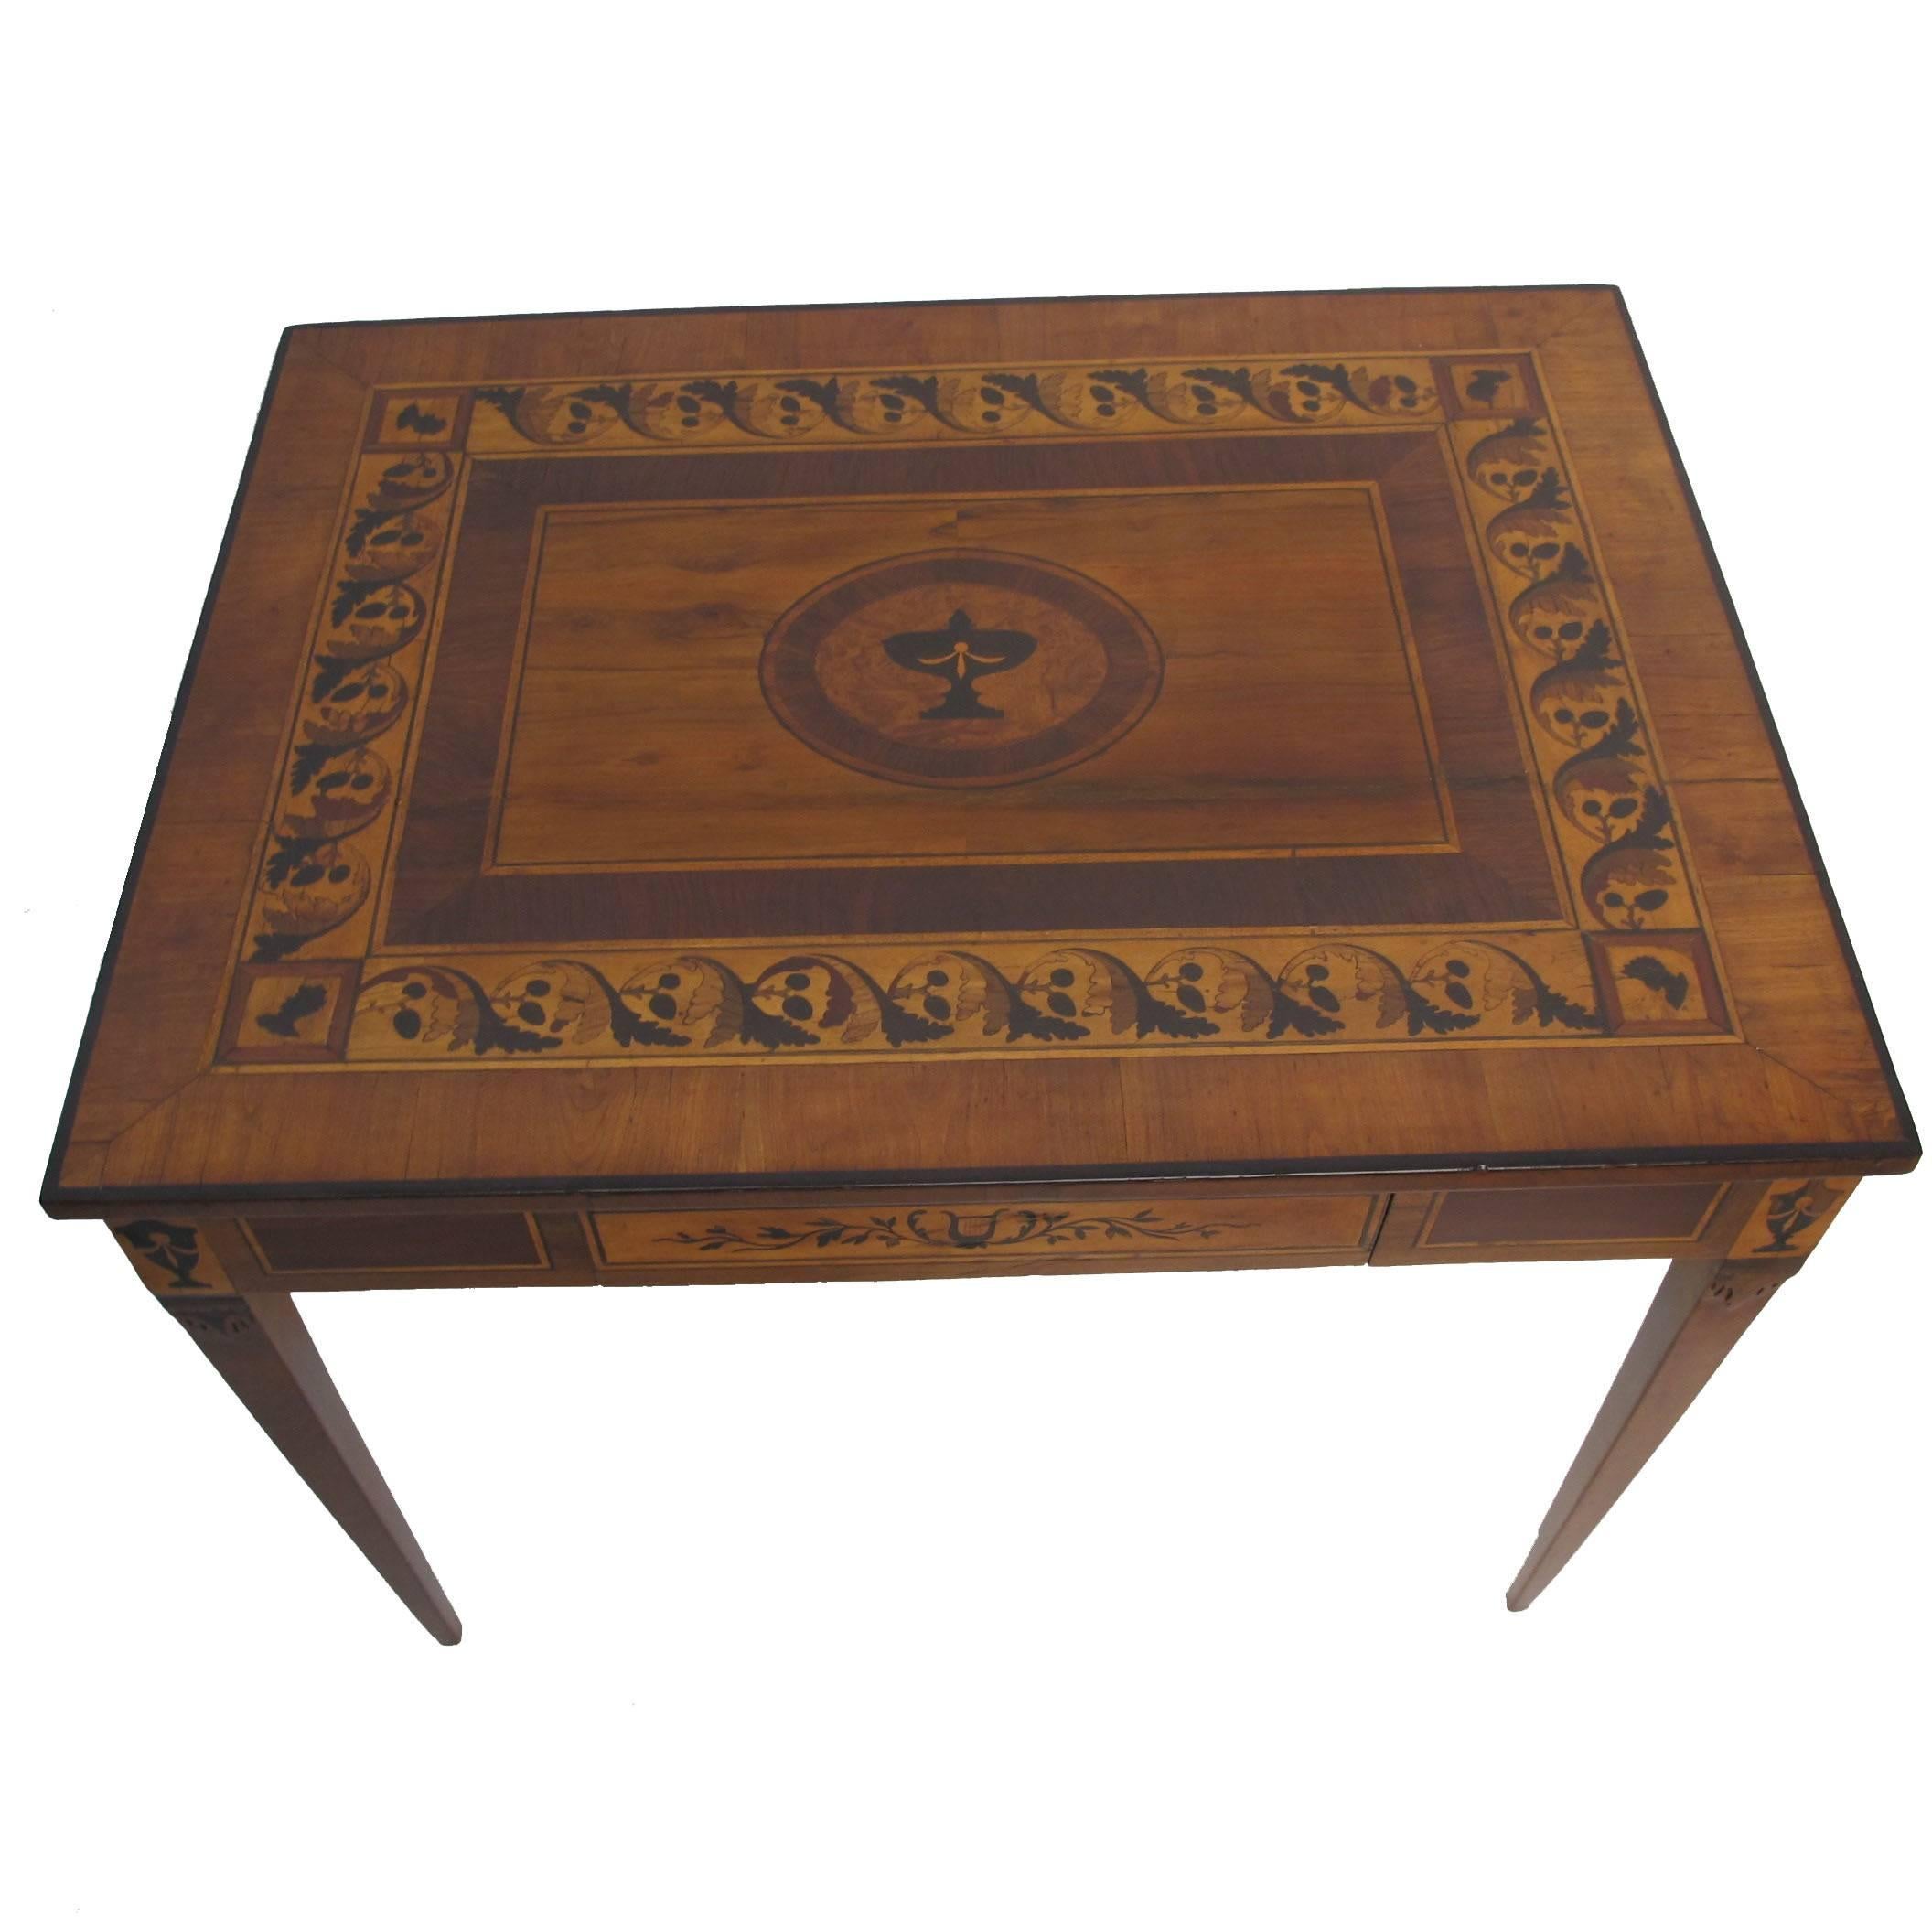  Italian Parquetry Inlaid Writing Table Desk, 18th Century For Sale 3